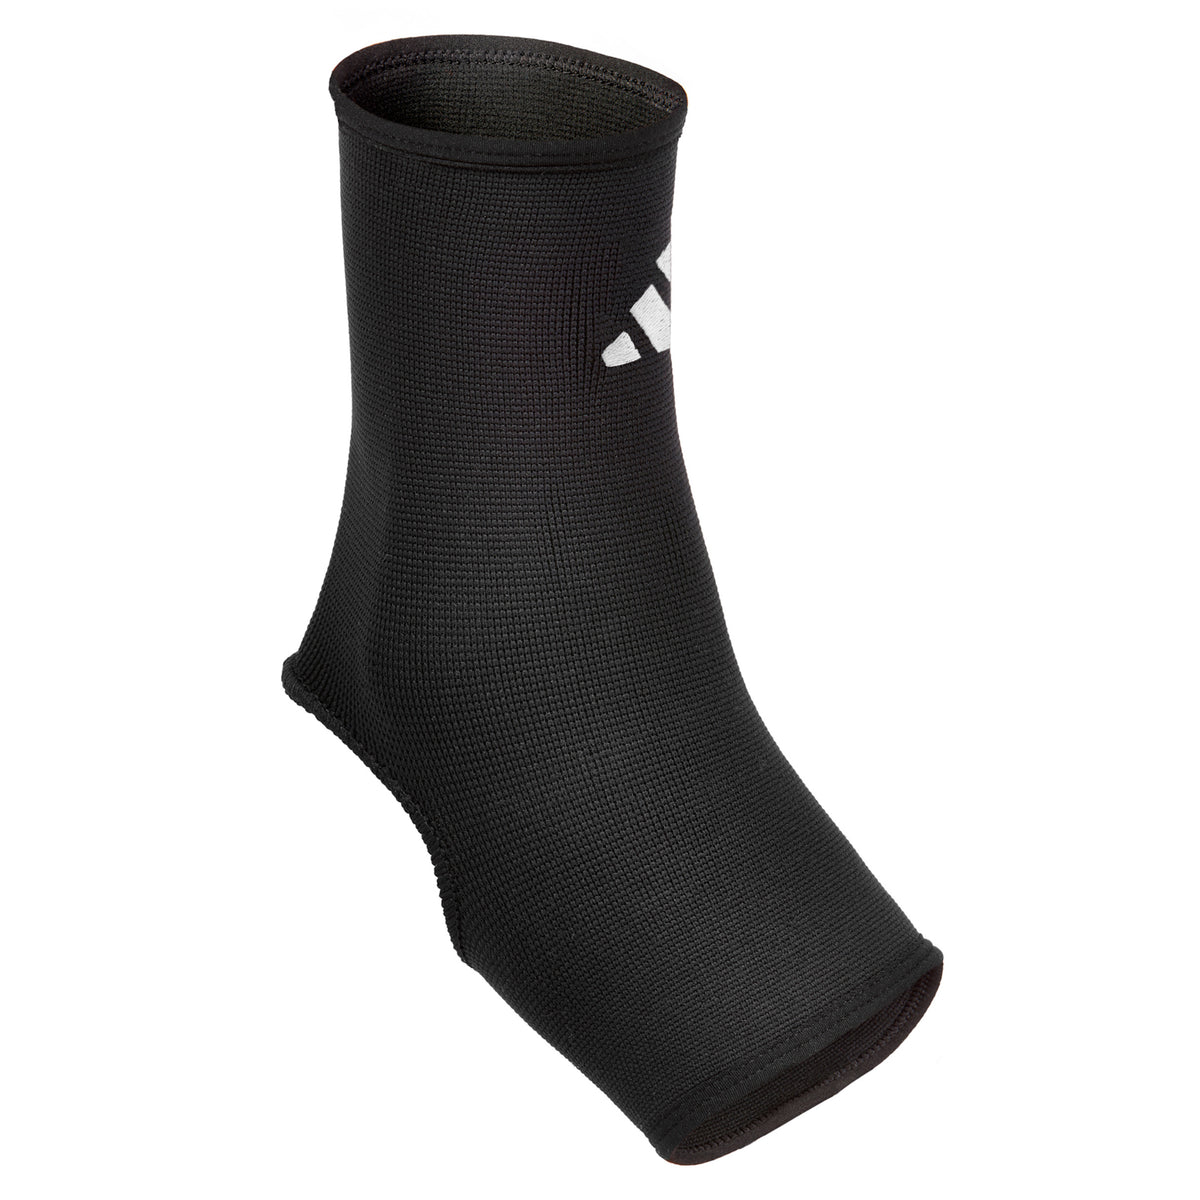 Adidas Ankle Support - Black